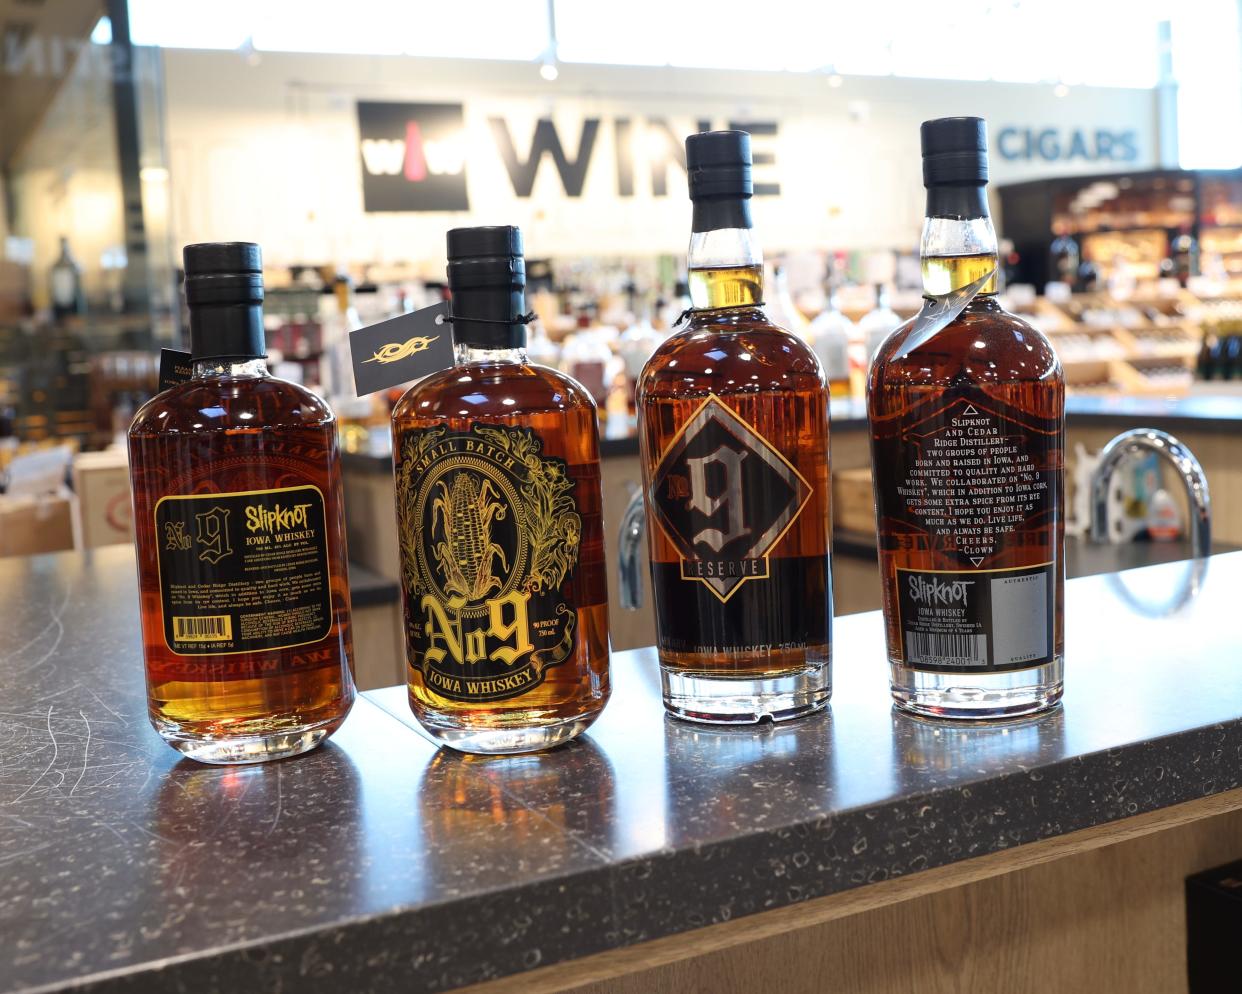 Des Moines-born metal band Slipknot teamed up with Cedar Ridge Distillery to make four different whiskeys.